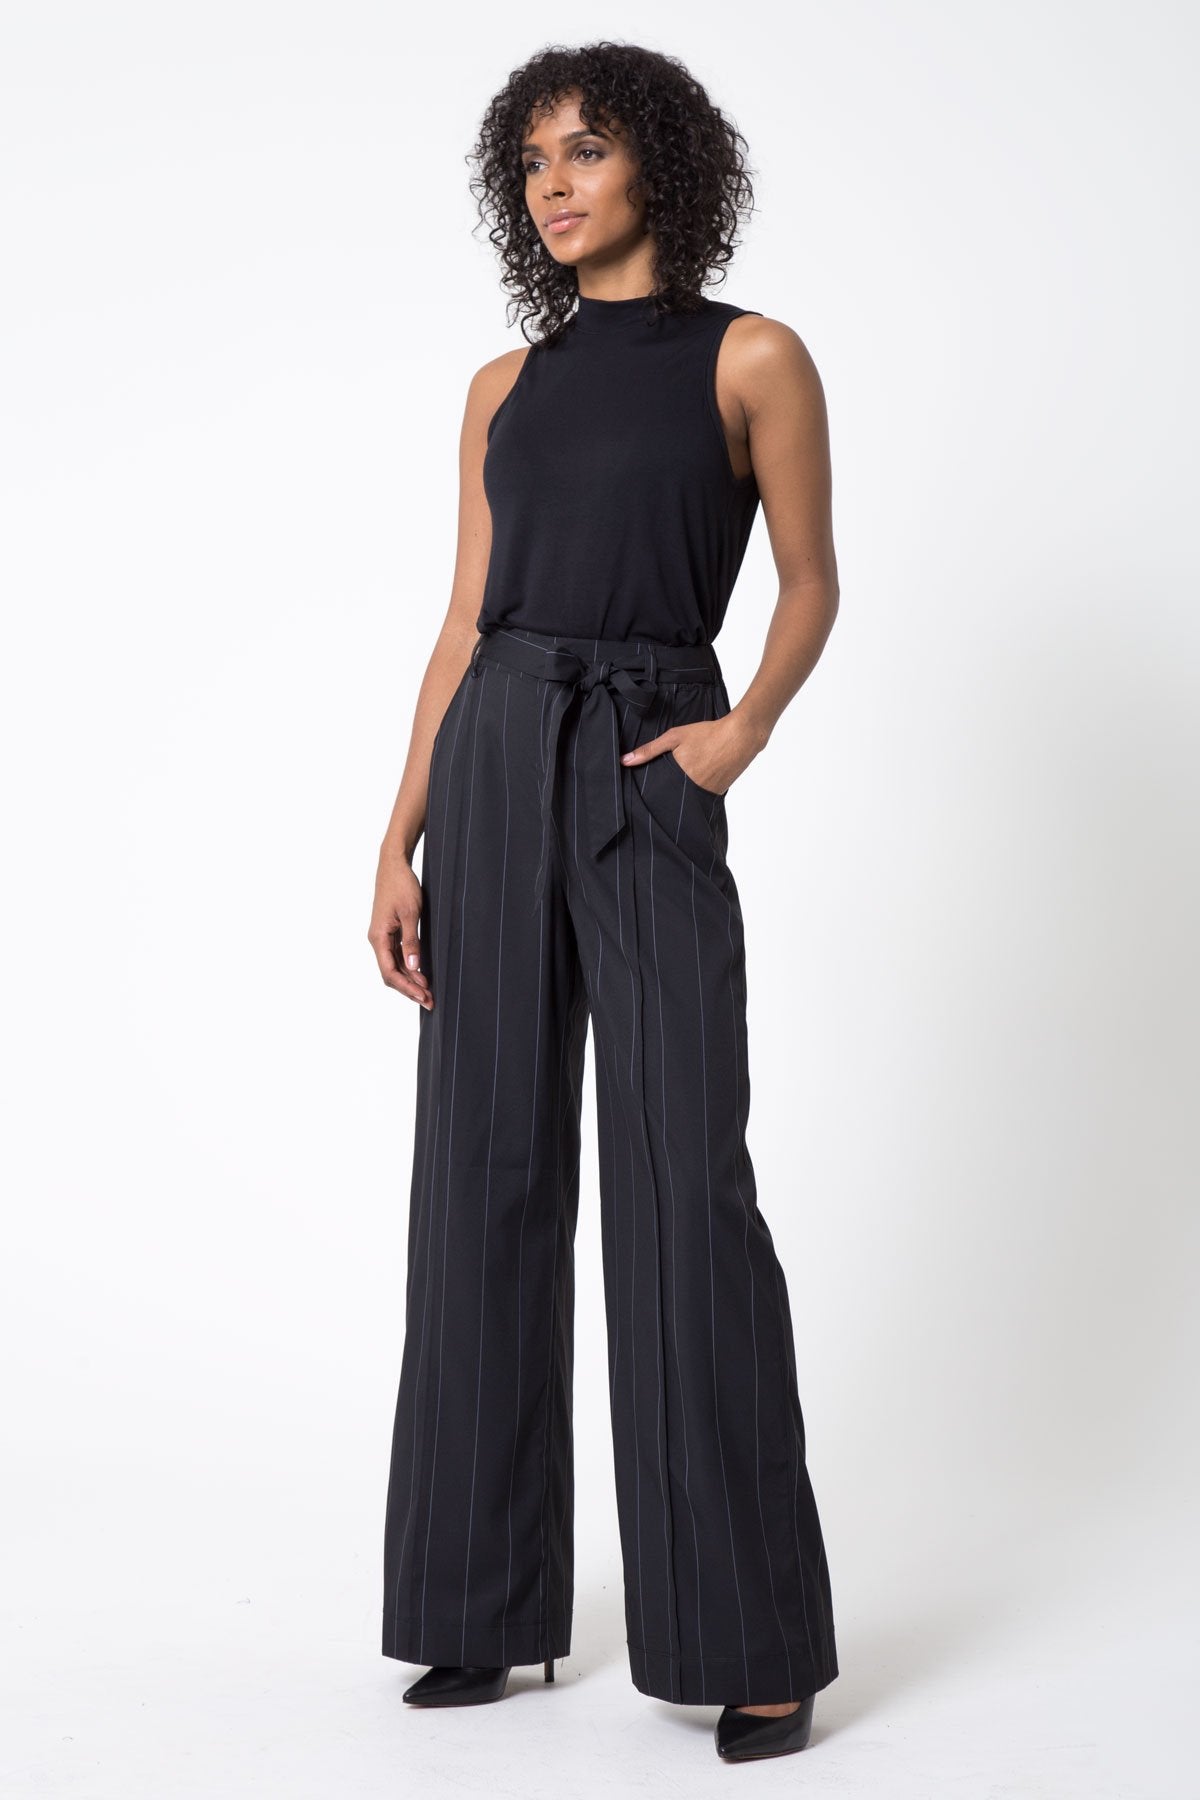 About Town Wide Leg Pant – MPG Sport Canada